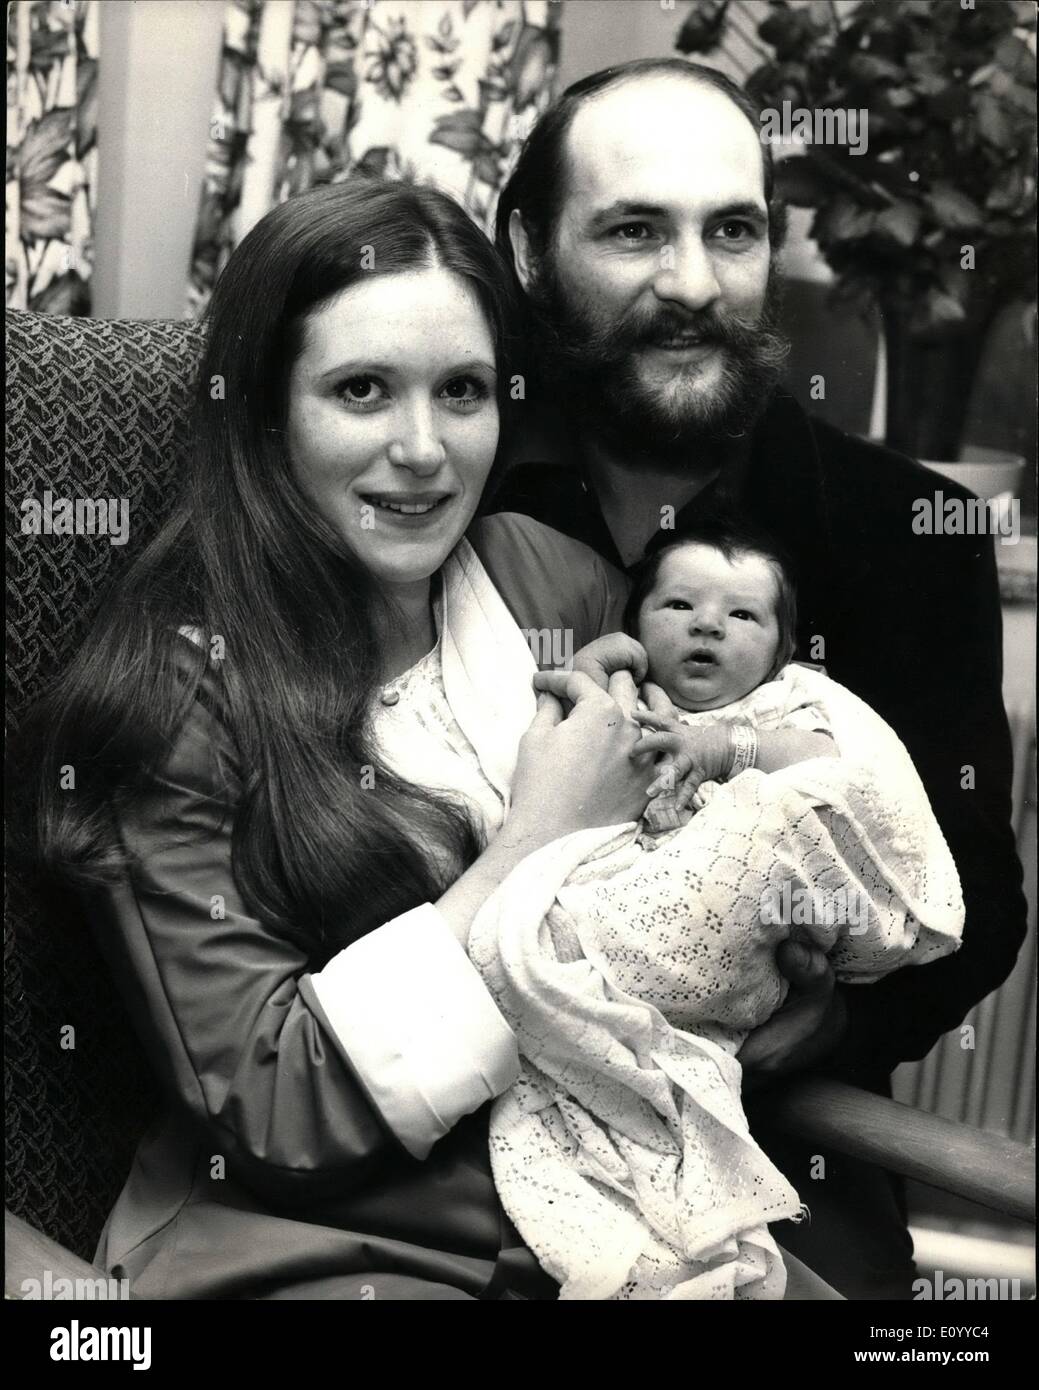 Nov. 11, 1971 - A son for Moody Blue Mike Pinder and His wife.; Donna, 20-year-old American born wife of Moody Blues members Mike Pinder gave birth to their first child, a son at St. Teresa's Hospital, Wimbledon on Tuesday (Nov23). The baby, who weighed 8lb 4 oz, is to be named Daniel Elan. The couple met in the U.S. and married last year in Epsom. They live in Cobham, Surrey. Mike Pinder plays mellotron, writes and sings with the Moddy Blues, one of the world's top bands Stock Photo